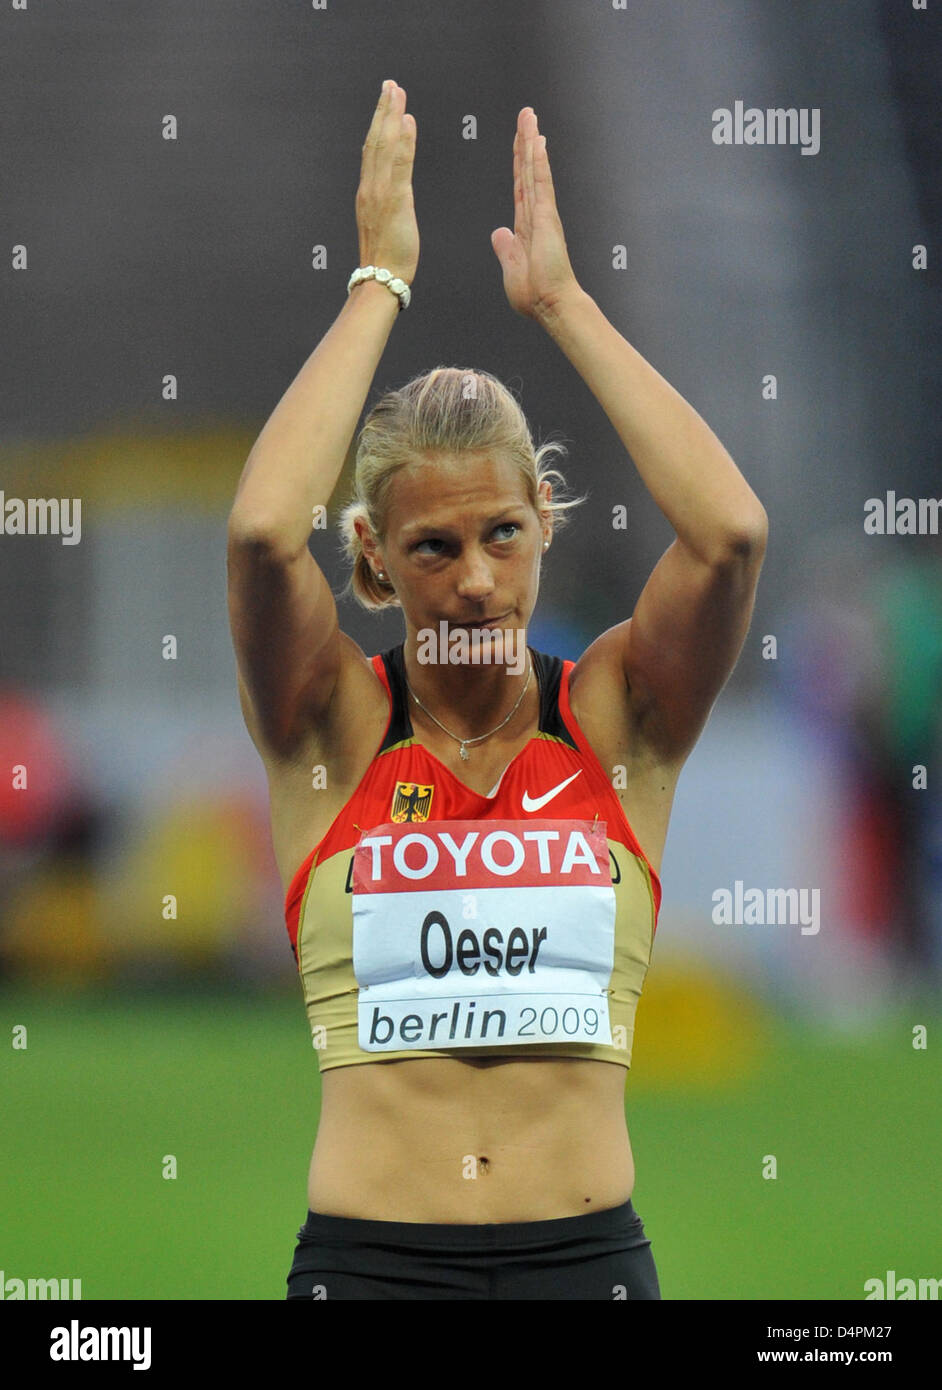 German Jennifer Oeser thanks the crowd during the javelin competion of the heptathlon at the 12th IAAF World Championships in Athletics in Berlin, Germany, 16 August 2009. Photo: BERND THISSEN Stock Photo